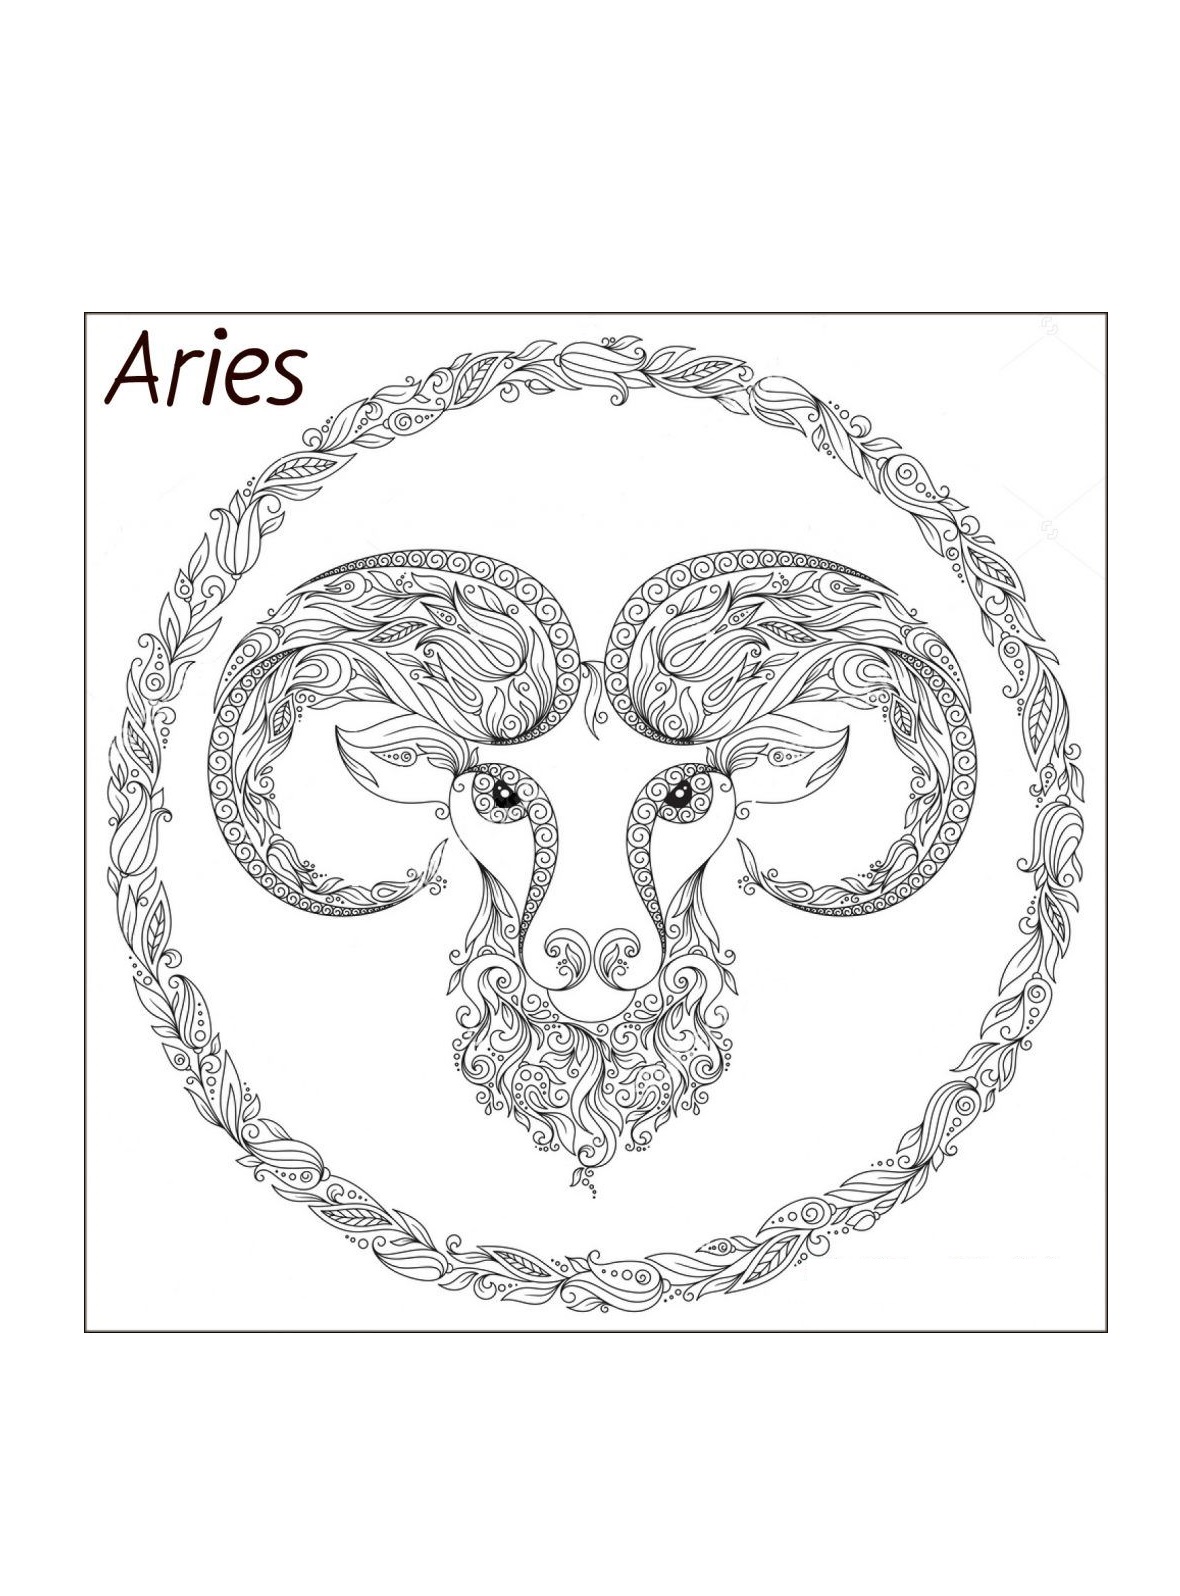 Aries Coloring Pages Pdf to Print - Aries Coloring Pages Free